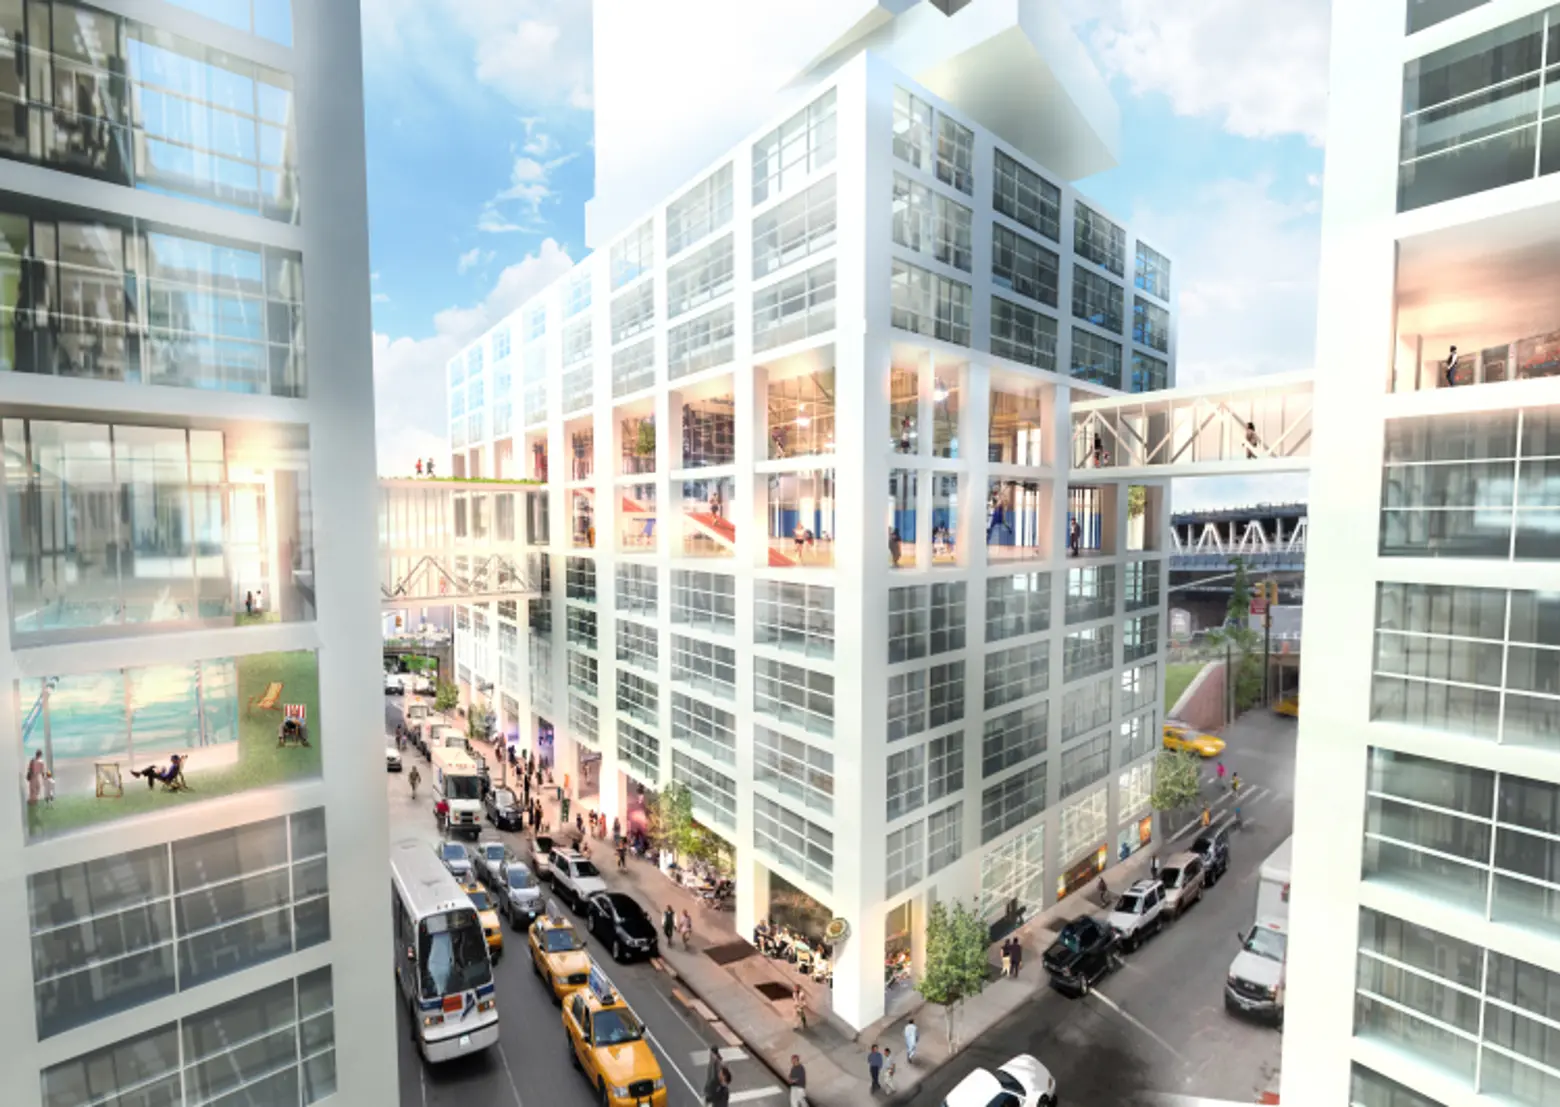 Is Vinegar Hill the Next DUMBO? A Storage Warehouse Owner is Banking on It